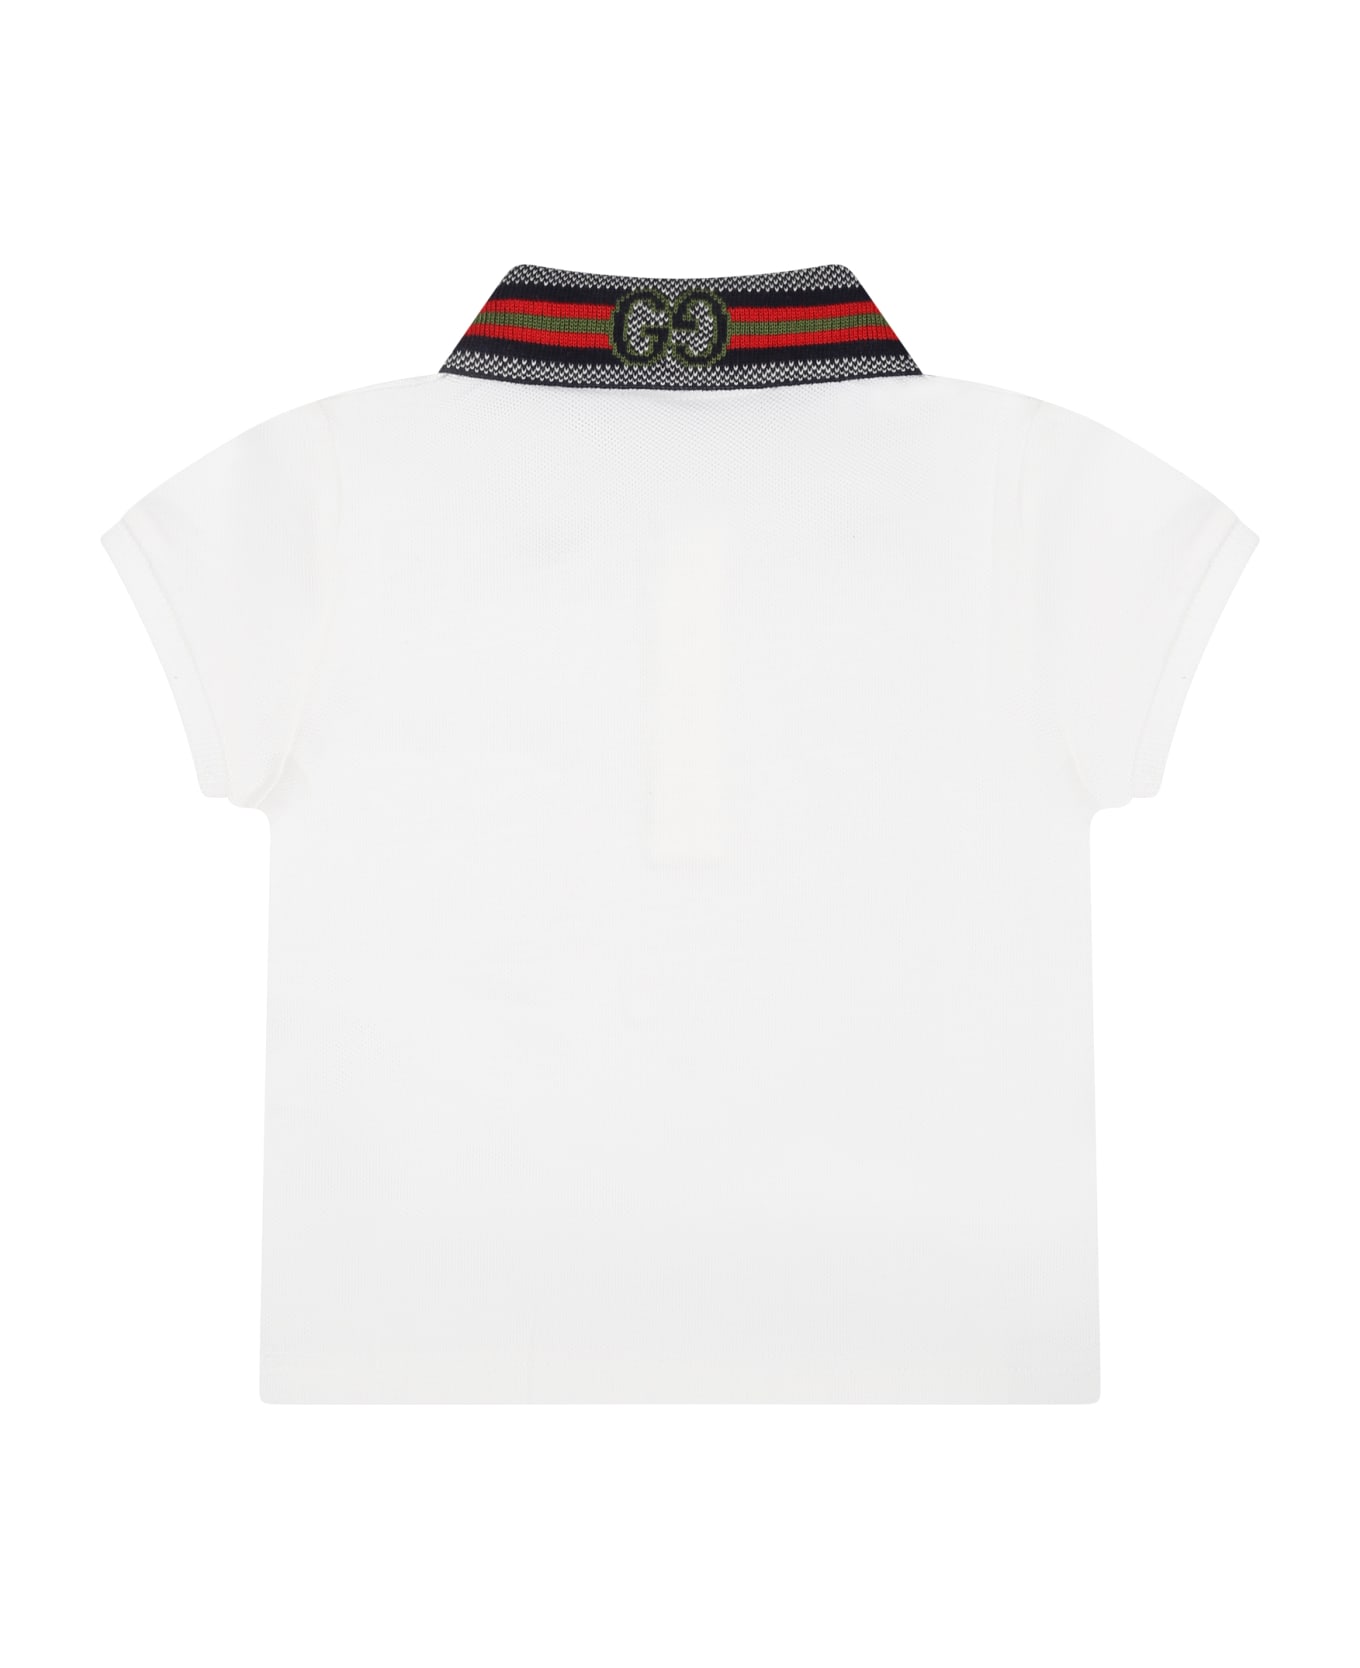 Gucci White Polo Shirt For Baby Boy With Double G - White